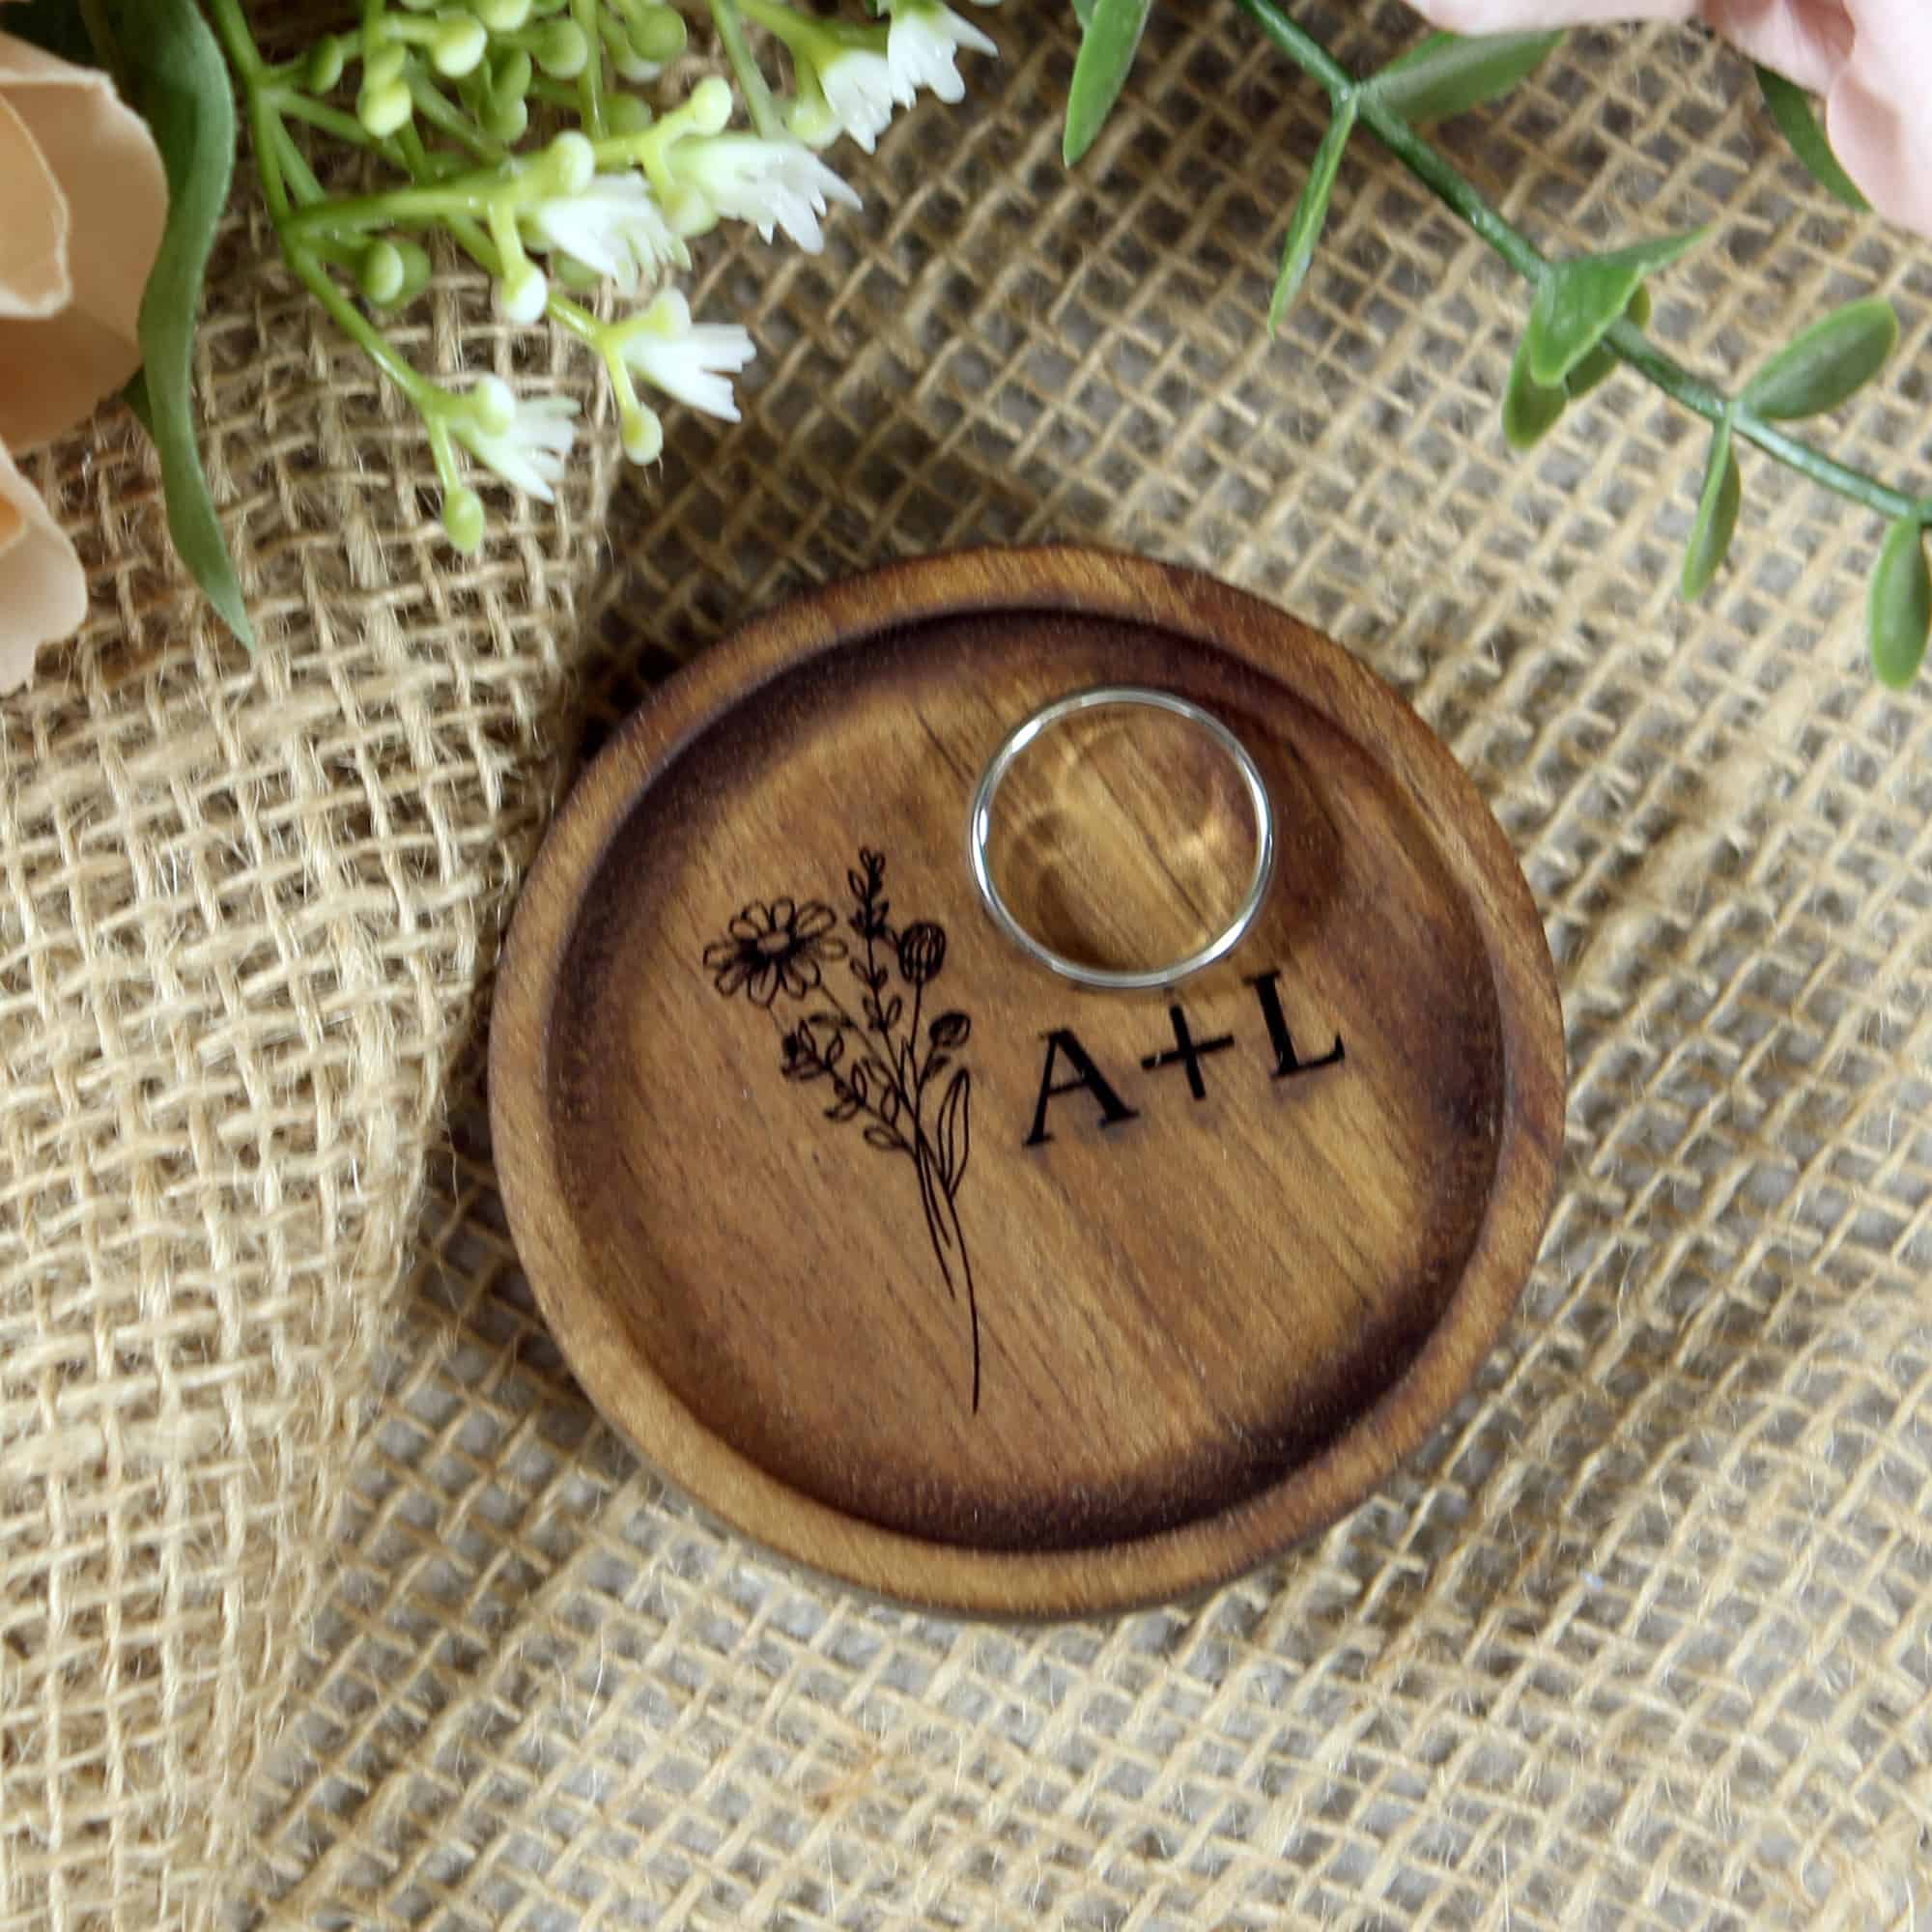 GORGECRAFT Engraved Proposal Wedding Ring Box Wooden Ring Holder Rustic  Shabby Chic Rings Bearer Necklaces Wood Storage Ceremony Gift Display :  Amazon.in: Jewellery